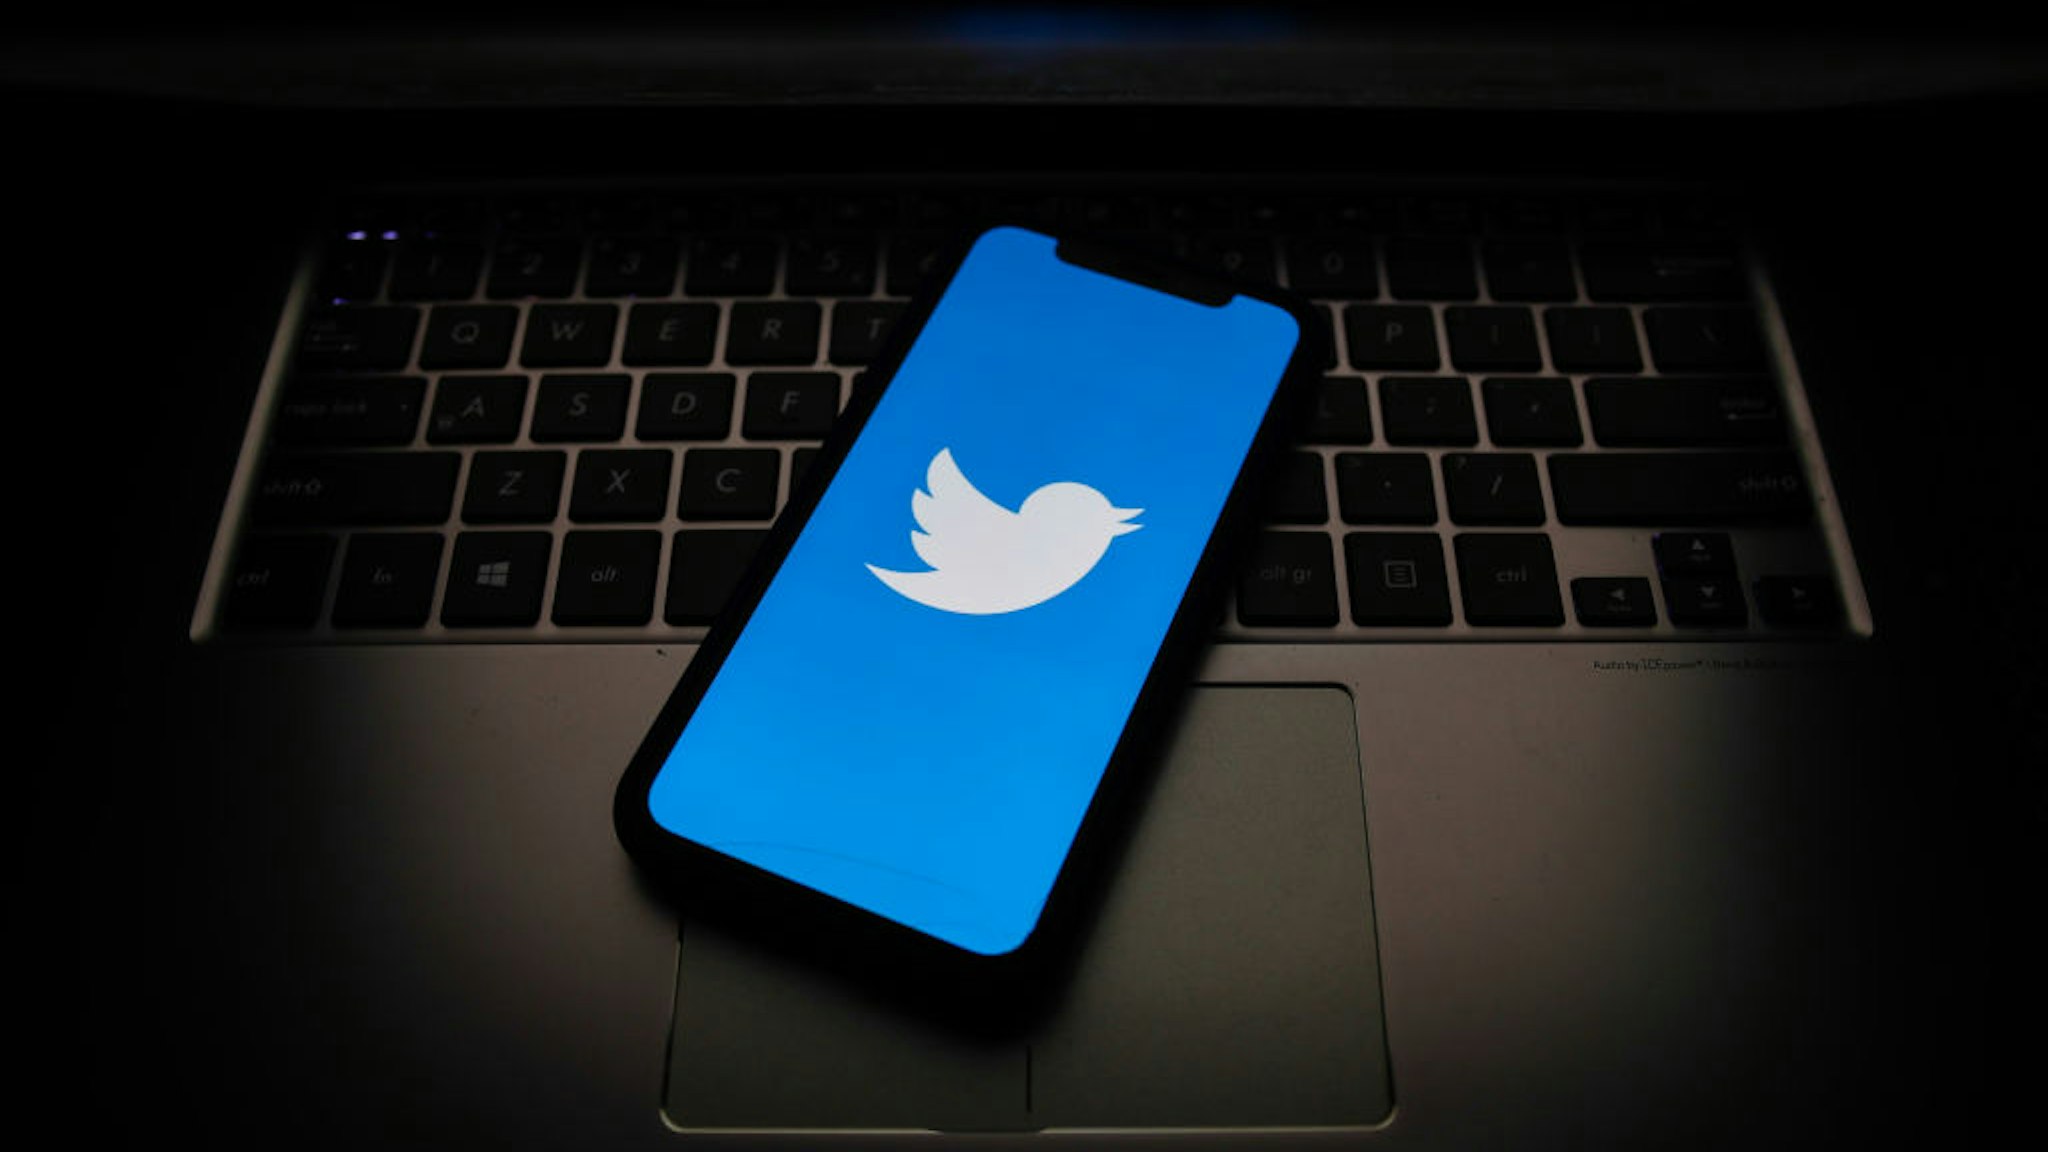 witter logo displayed on a phone screen is seen in this illustration photo taken on October 18, 2020. (Photo Illustration by Jakub Porzycki/NurPhoto via Getty Images)